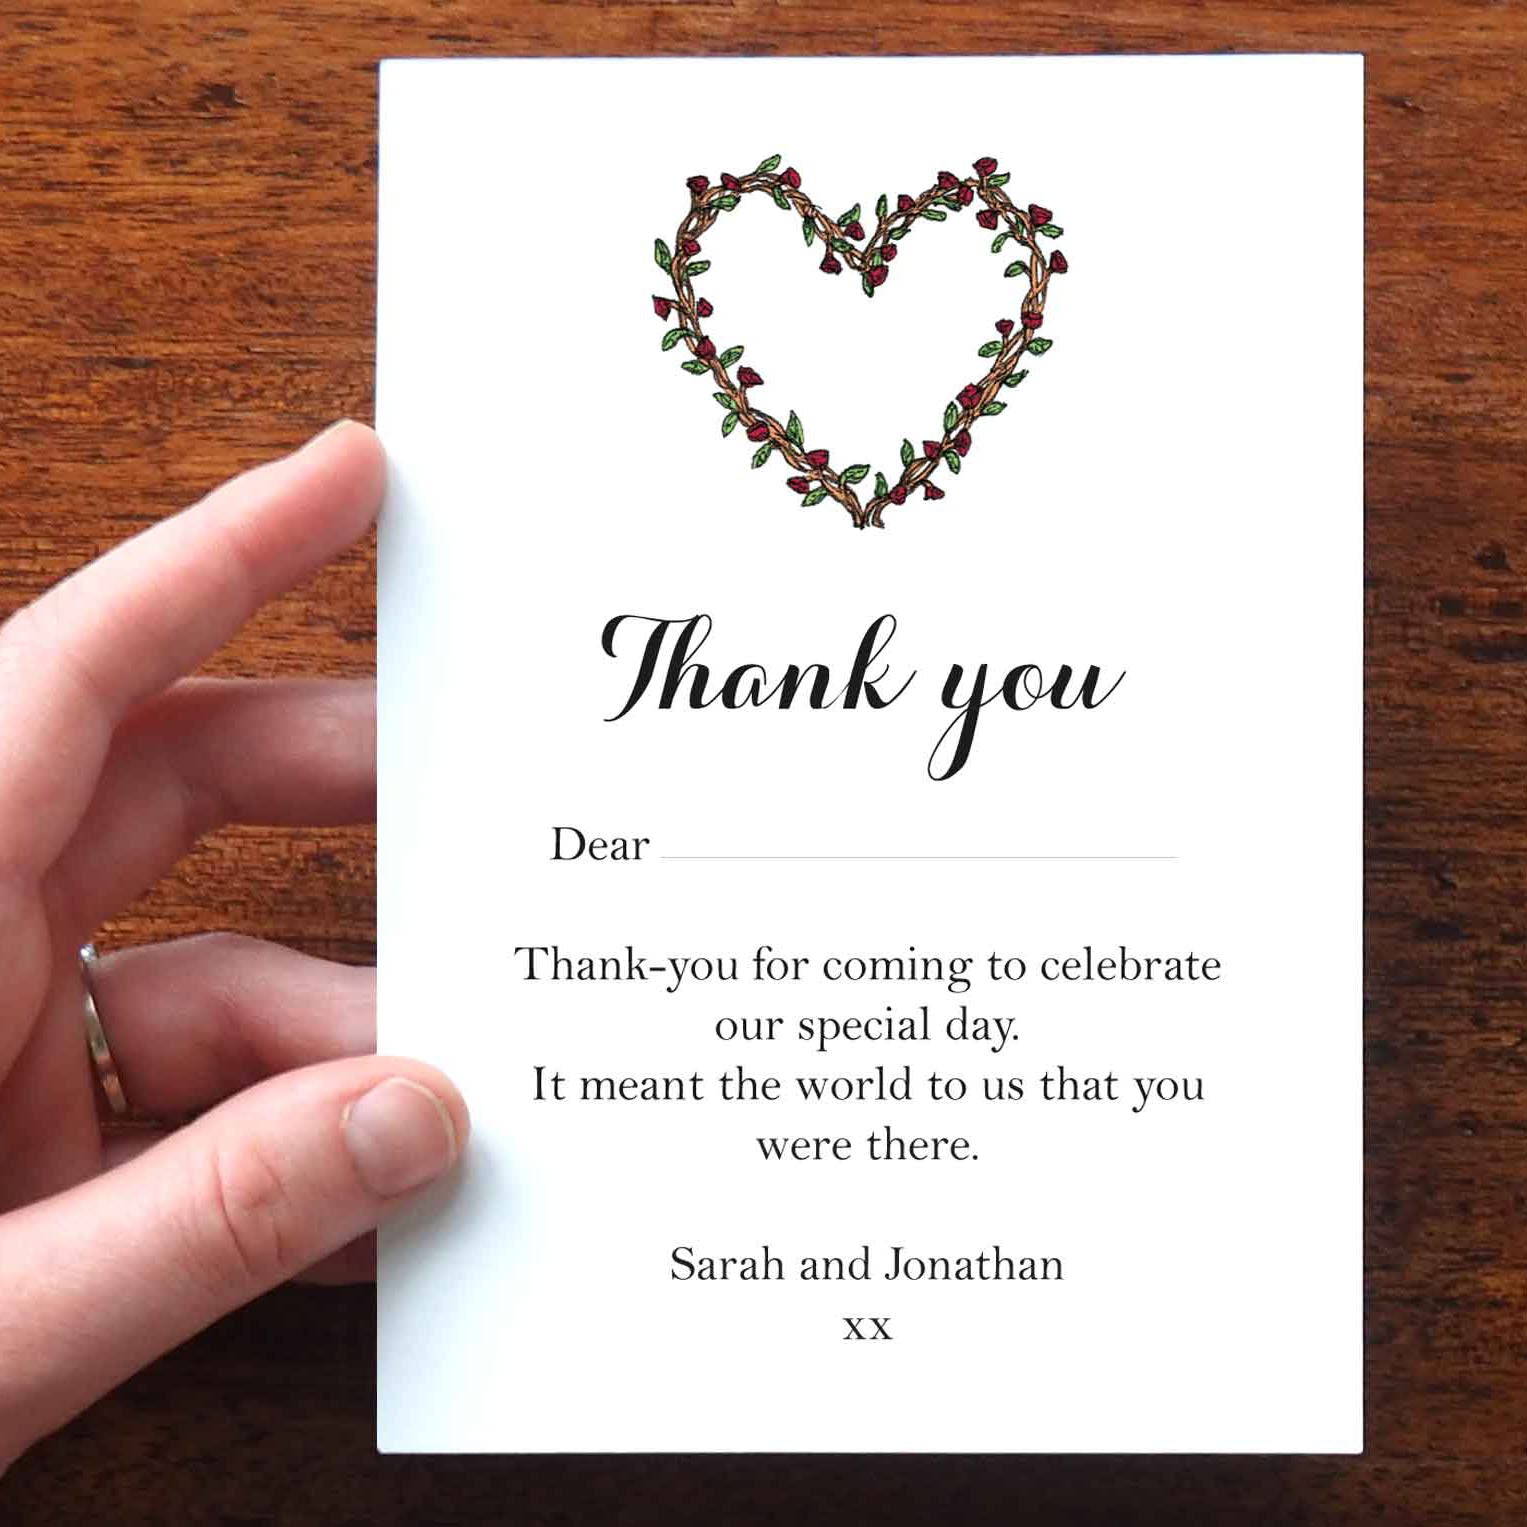 Tips For Writing Wedding Thank You Cards The Nonsense Maker Blog